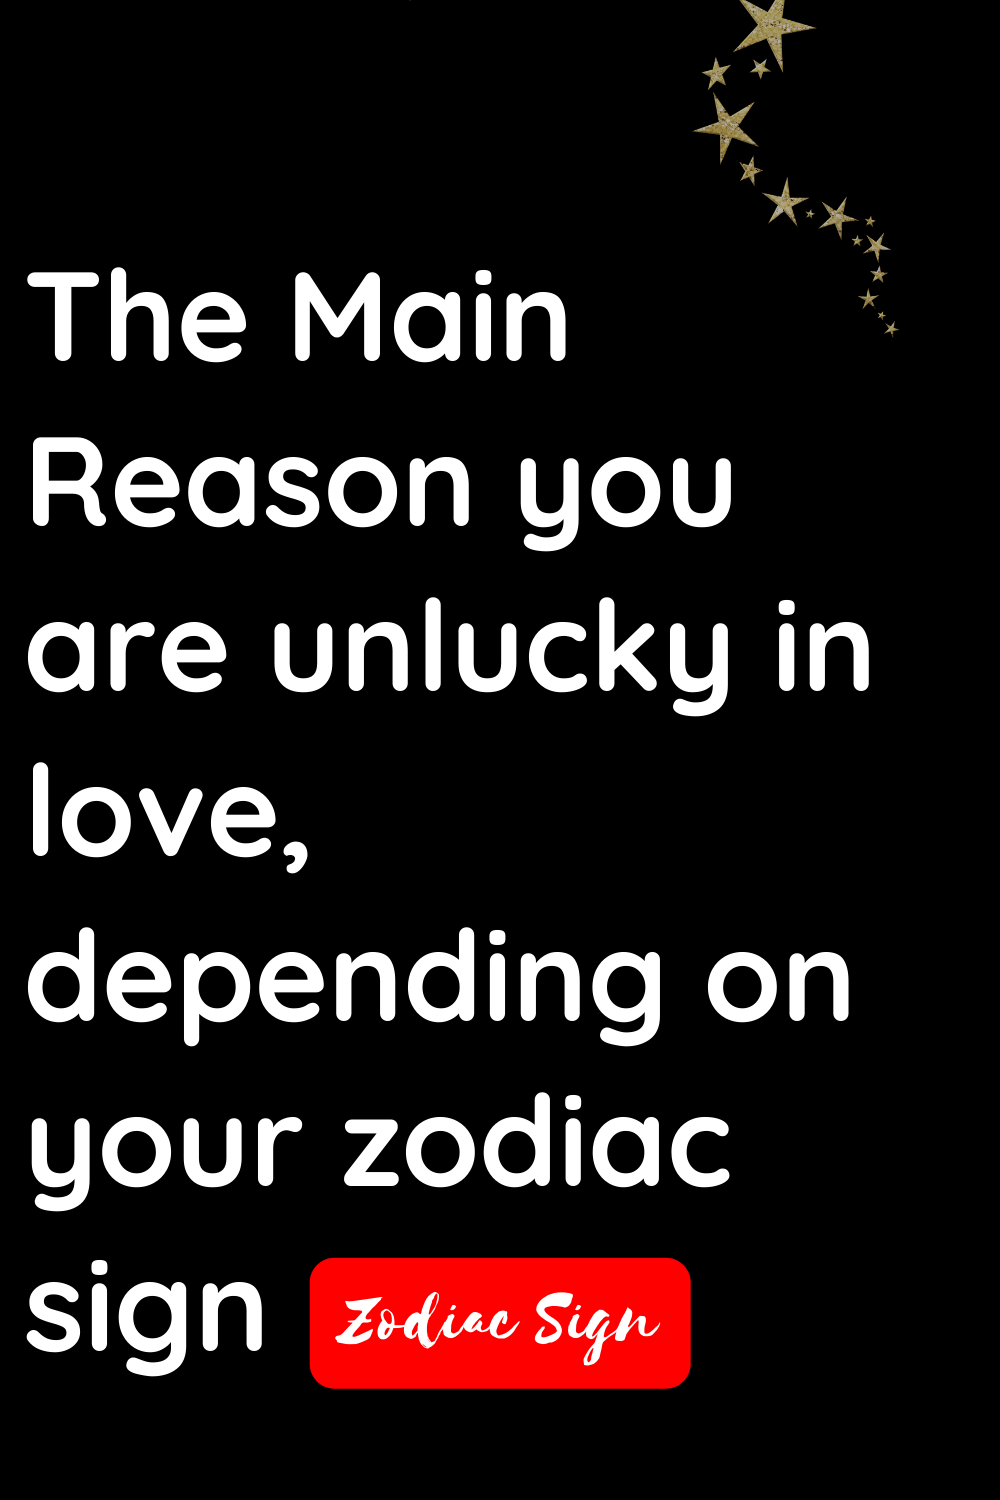 The main reason you are unlucky in love, depending on your zodiac sign